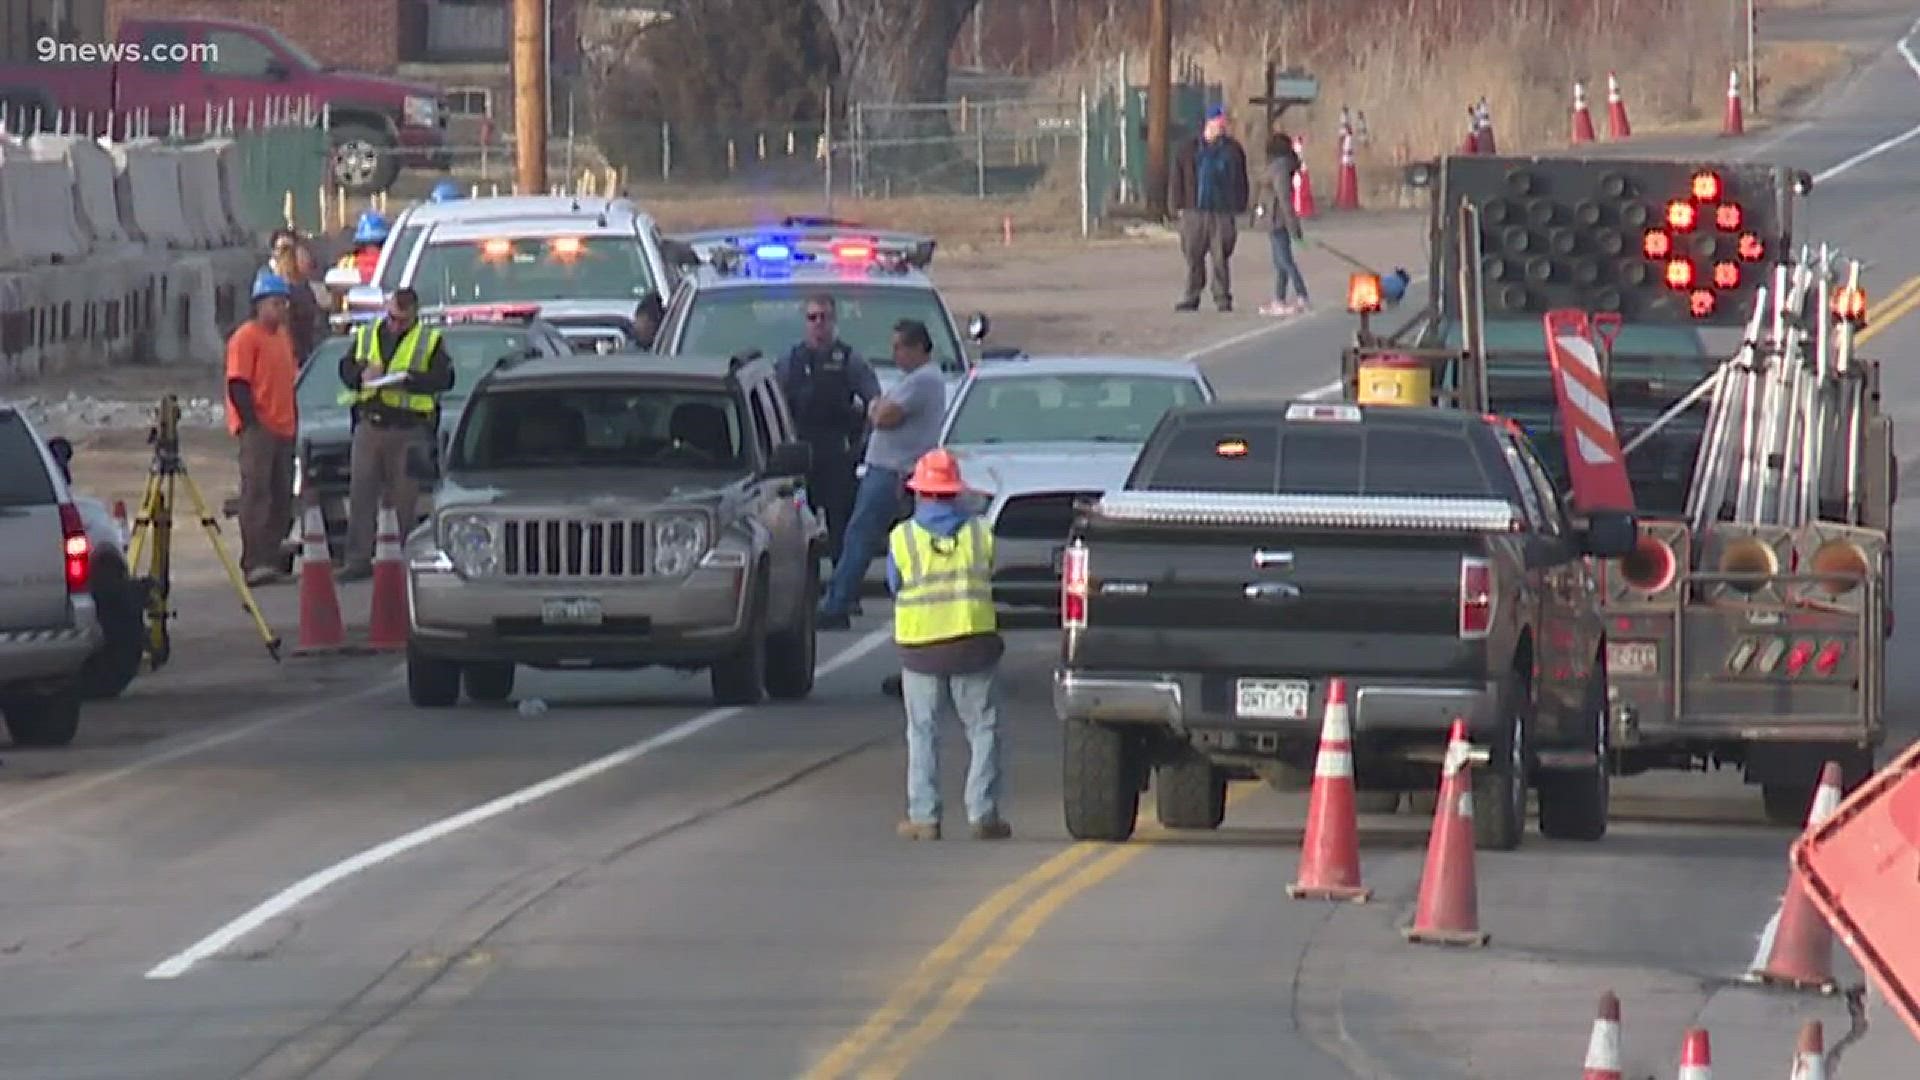 Trooper Gary Cutler with Colorado State Patrol said a Jeep hit and pinned a traffic-directing construction flagger at 62nd Avenue and Lowell Boulevard just before 3 p.m. on Wednesday.